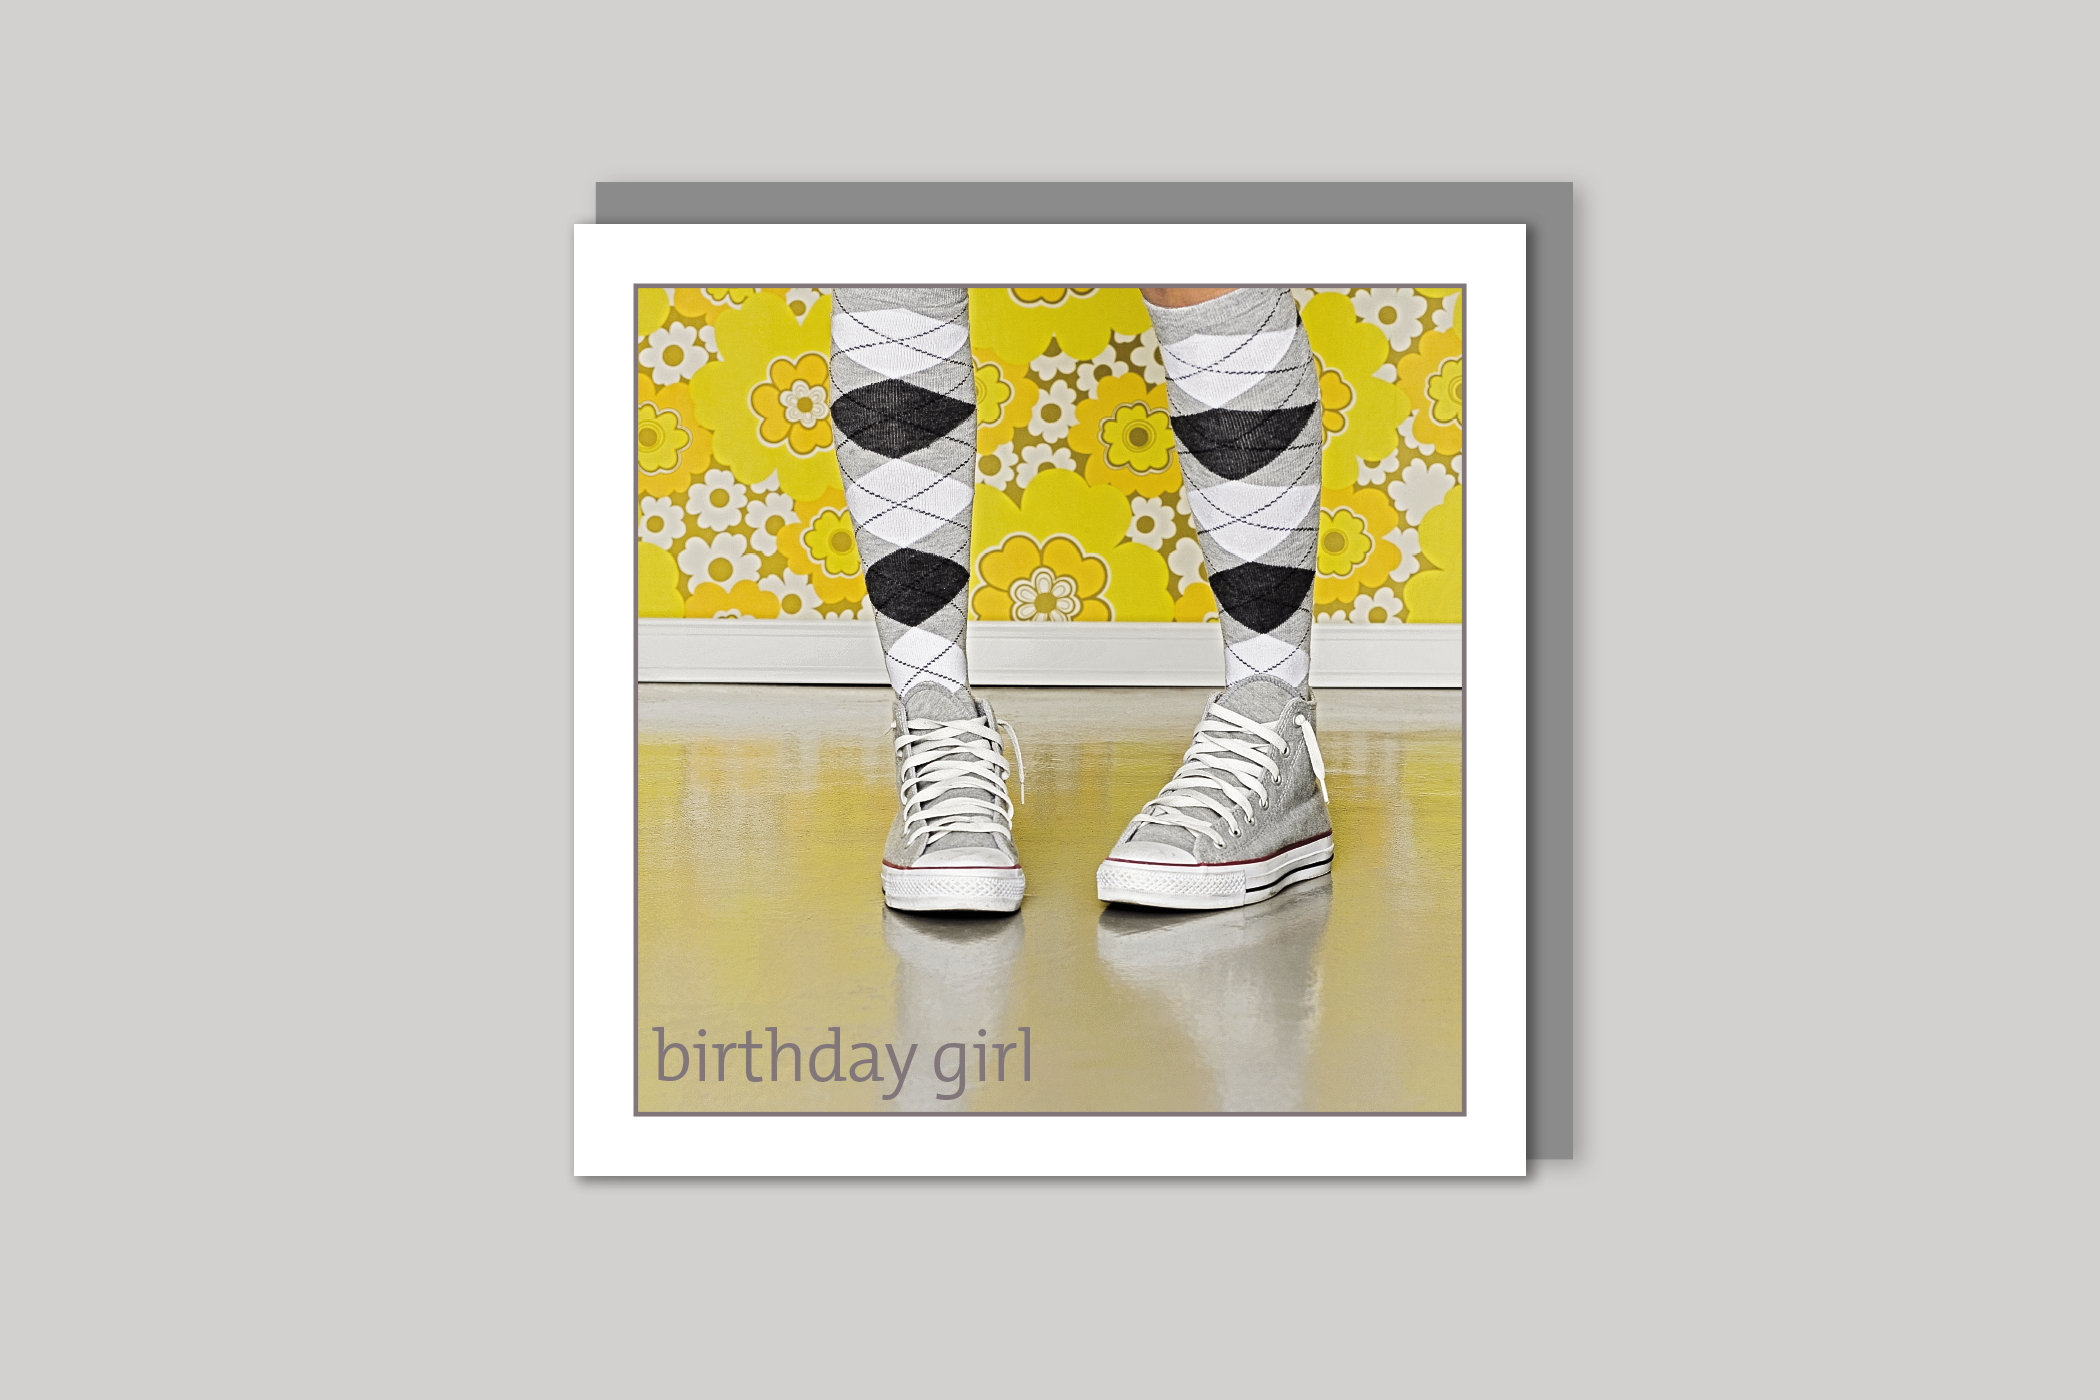 Birthday Girl from Exposure Silver Edition range of greeting cards by Icon, back page.